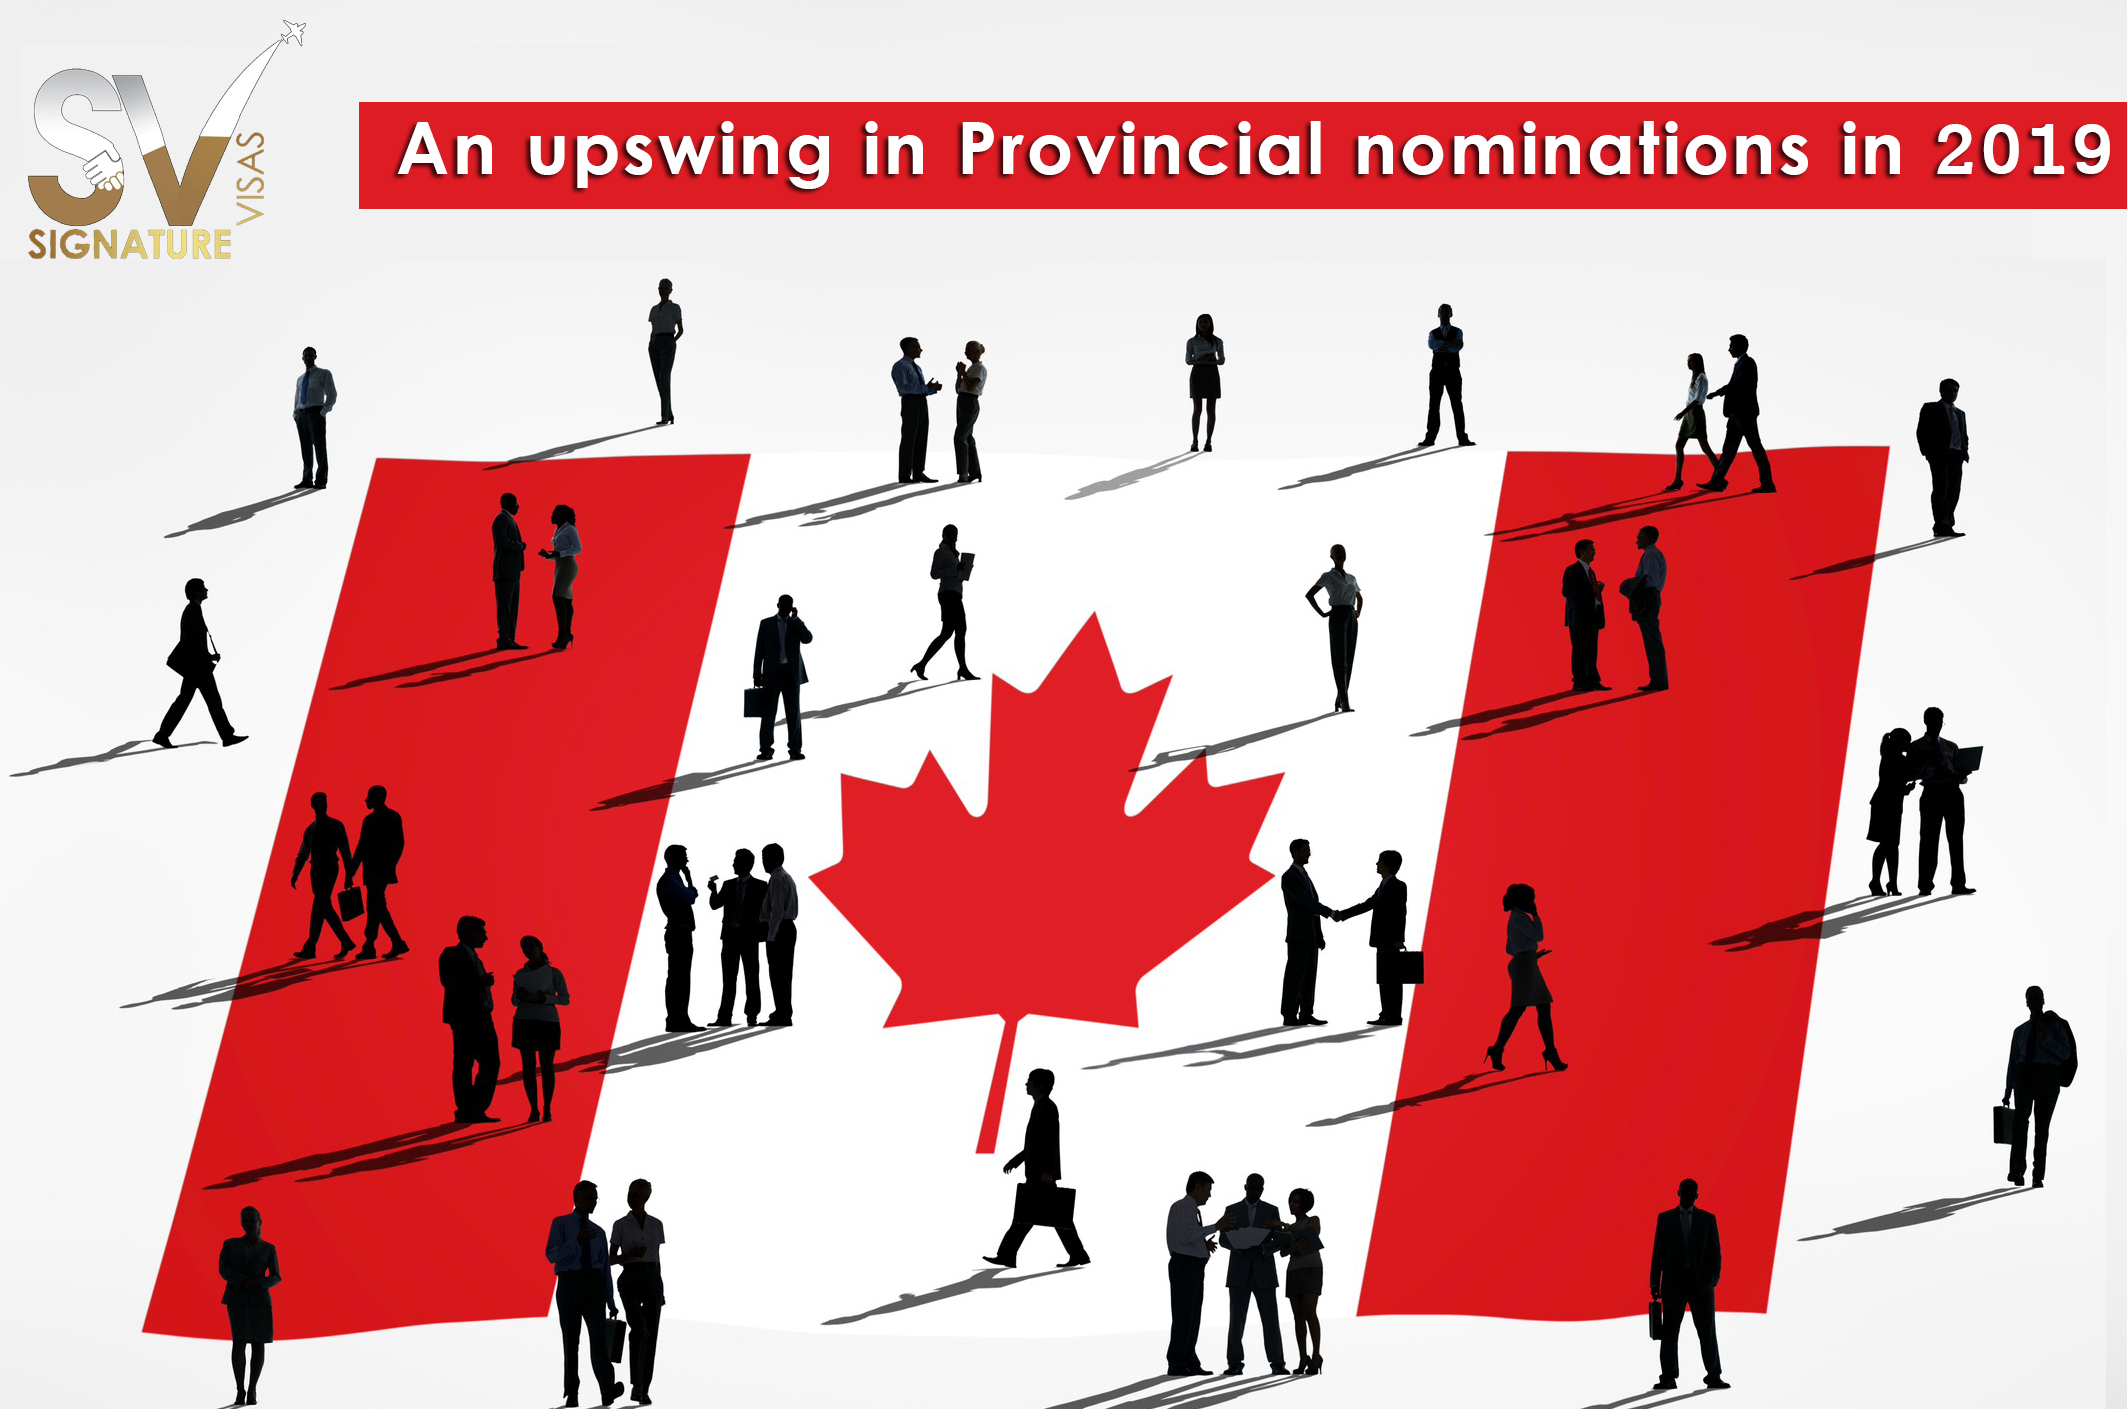 36_An upswing in Provincial nominations in 2019.jpg